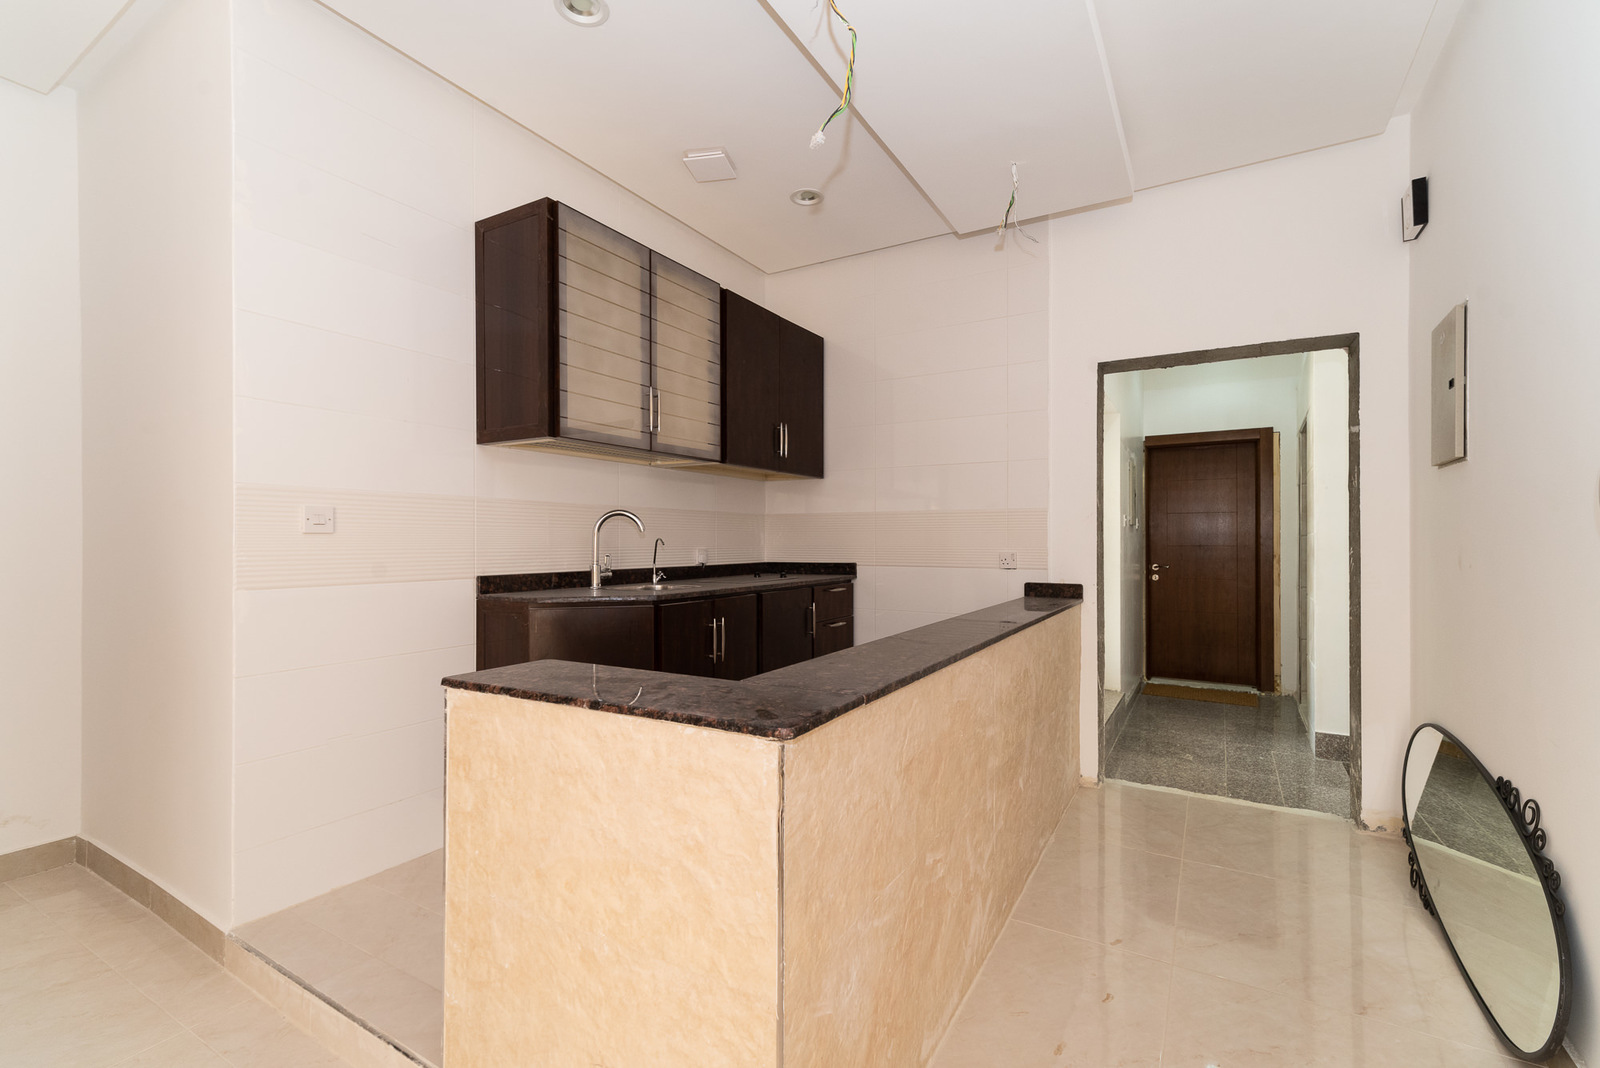 Bayan – new, unfurnished, 1 bedroom apartment